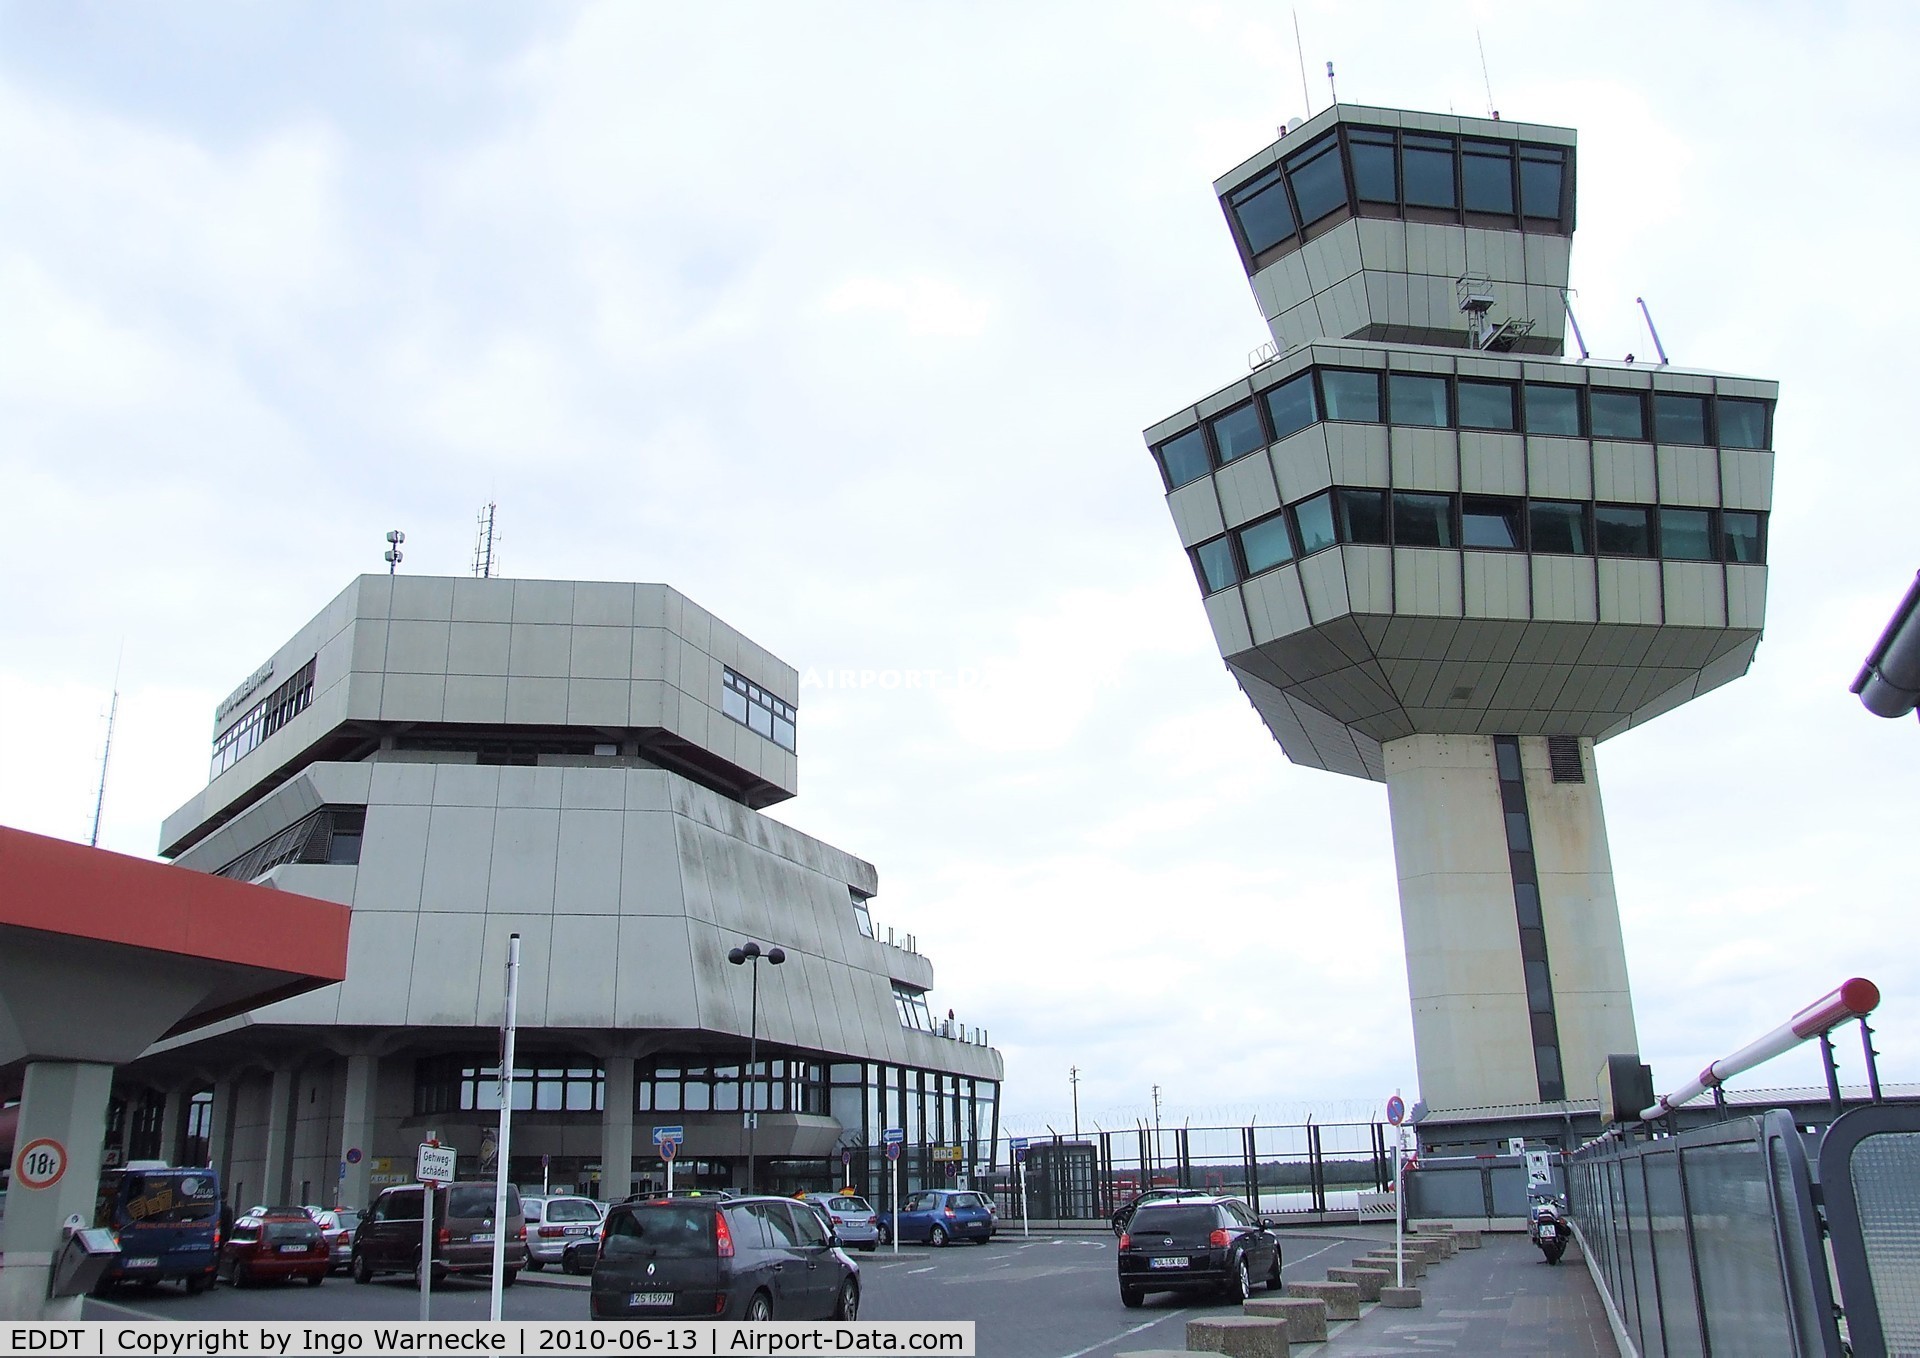 Tegel International Airport (closing in 2011), Berlin Germany (EDDT) - landside view of the tower and eastern entry into main terminal at Berlin Tegel airport